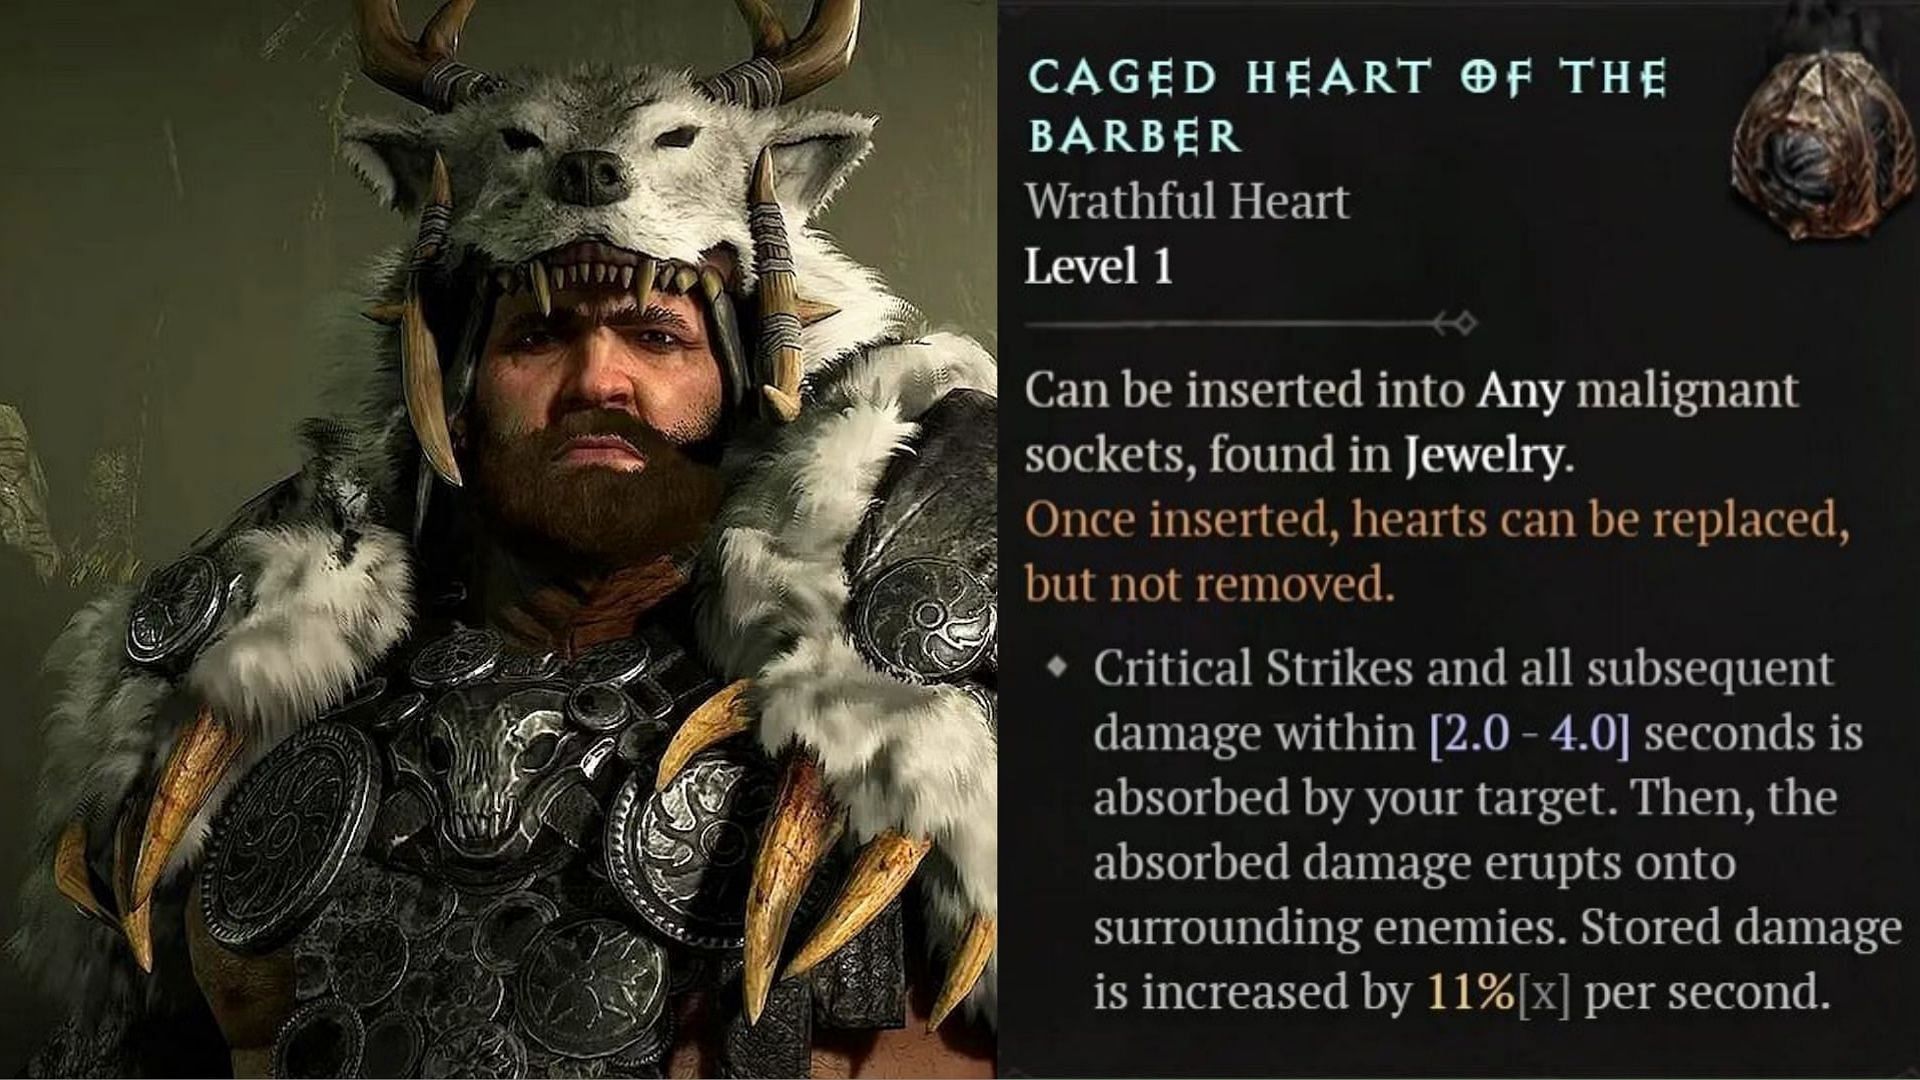 The Barber is an ideal Malignant Heart for this build (Image via Blizzard Entertainment)